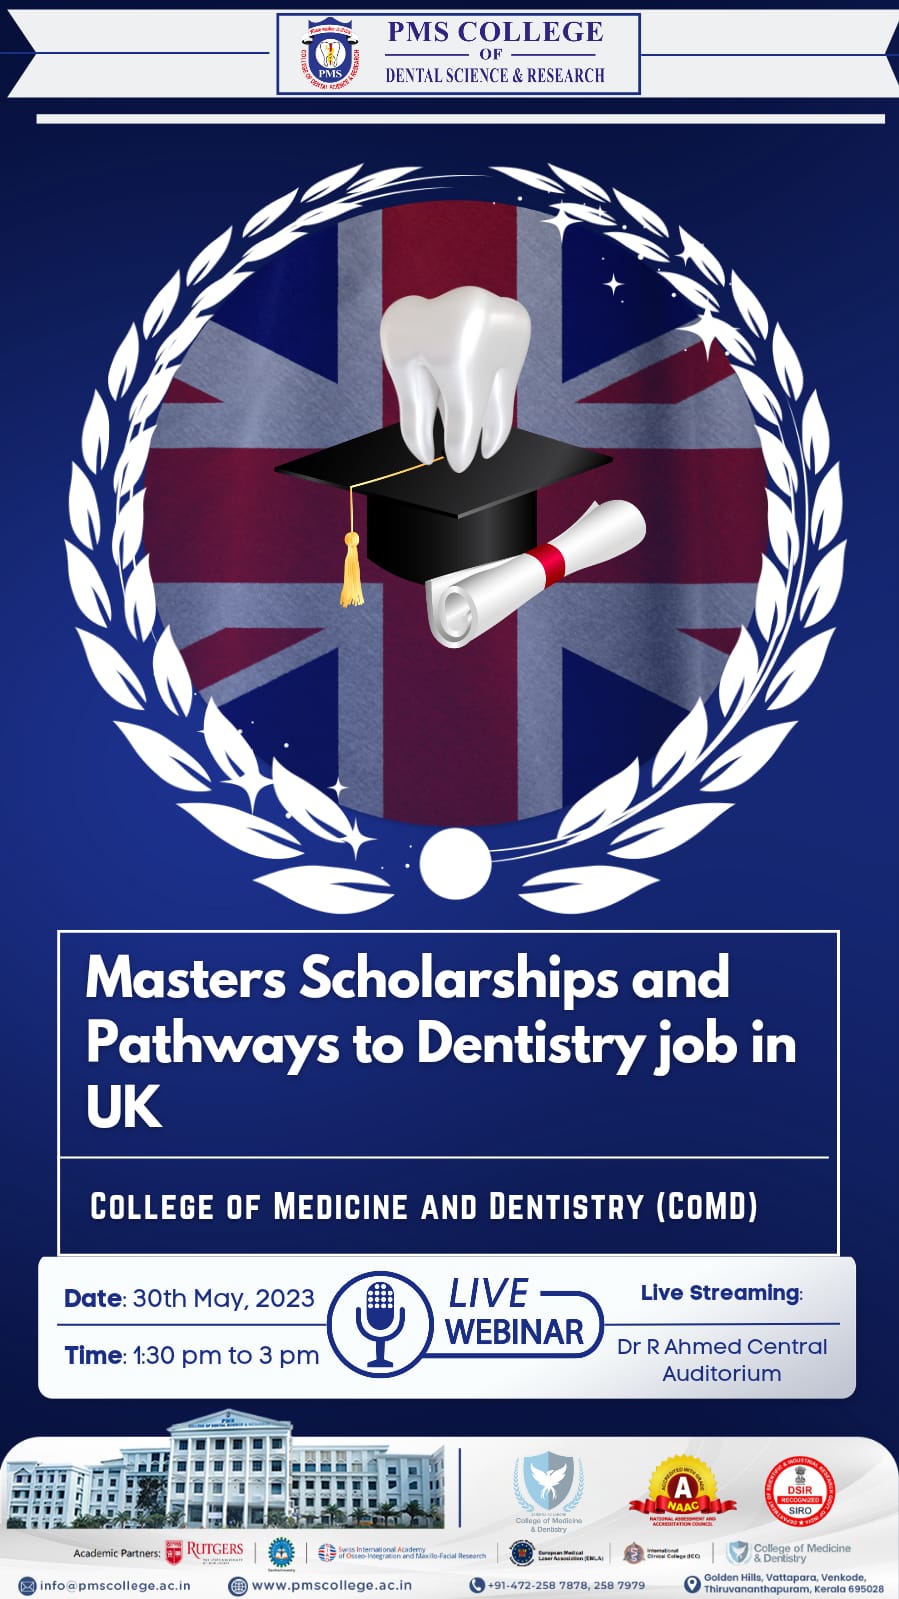 MASTERS SCHOLARSHIP AND PATHWAYS TO DENTISTRY JOB IN UK